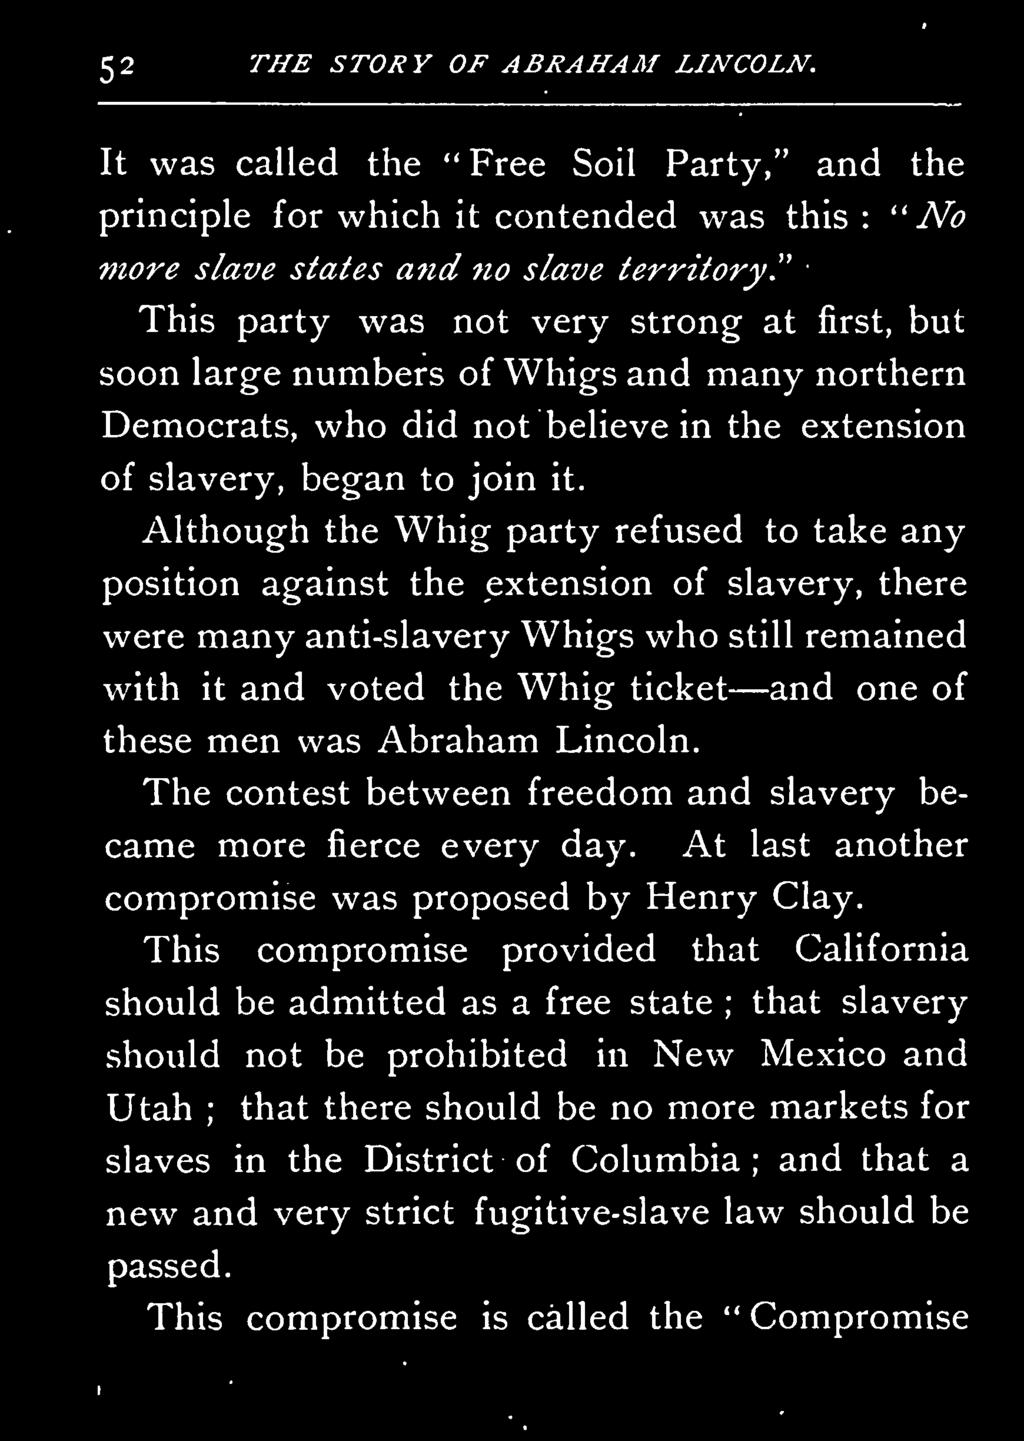 numbers of Whigs and many northern Democrats, who did not believe in the of slavery, began to join it.